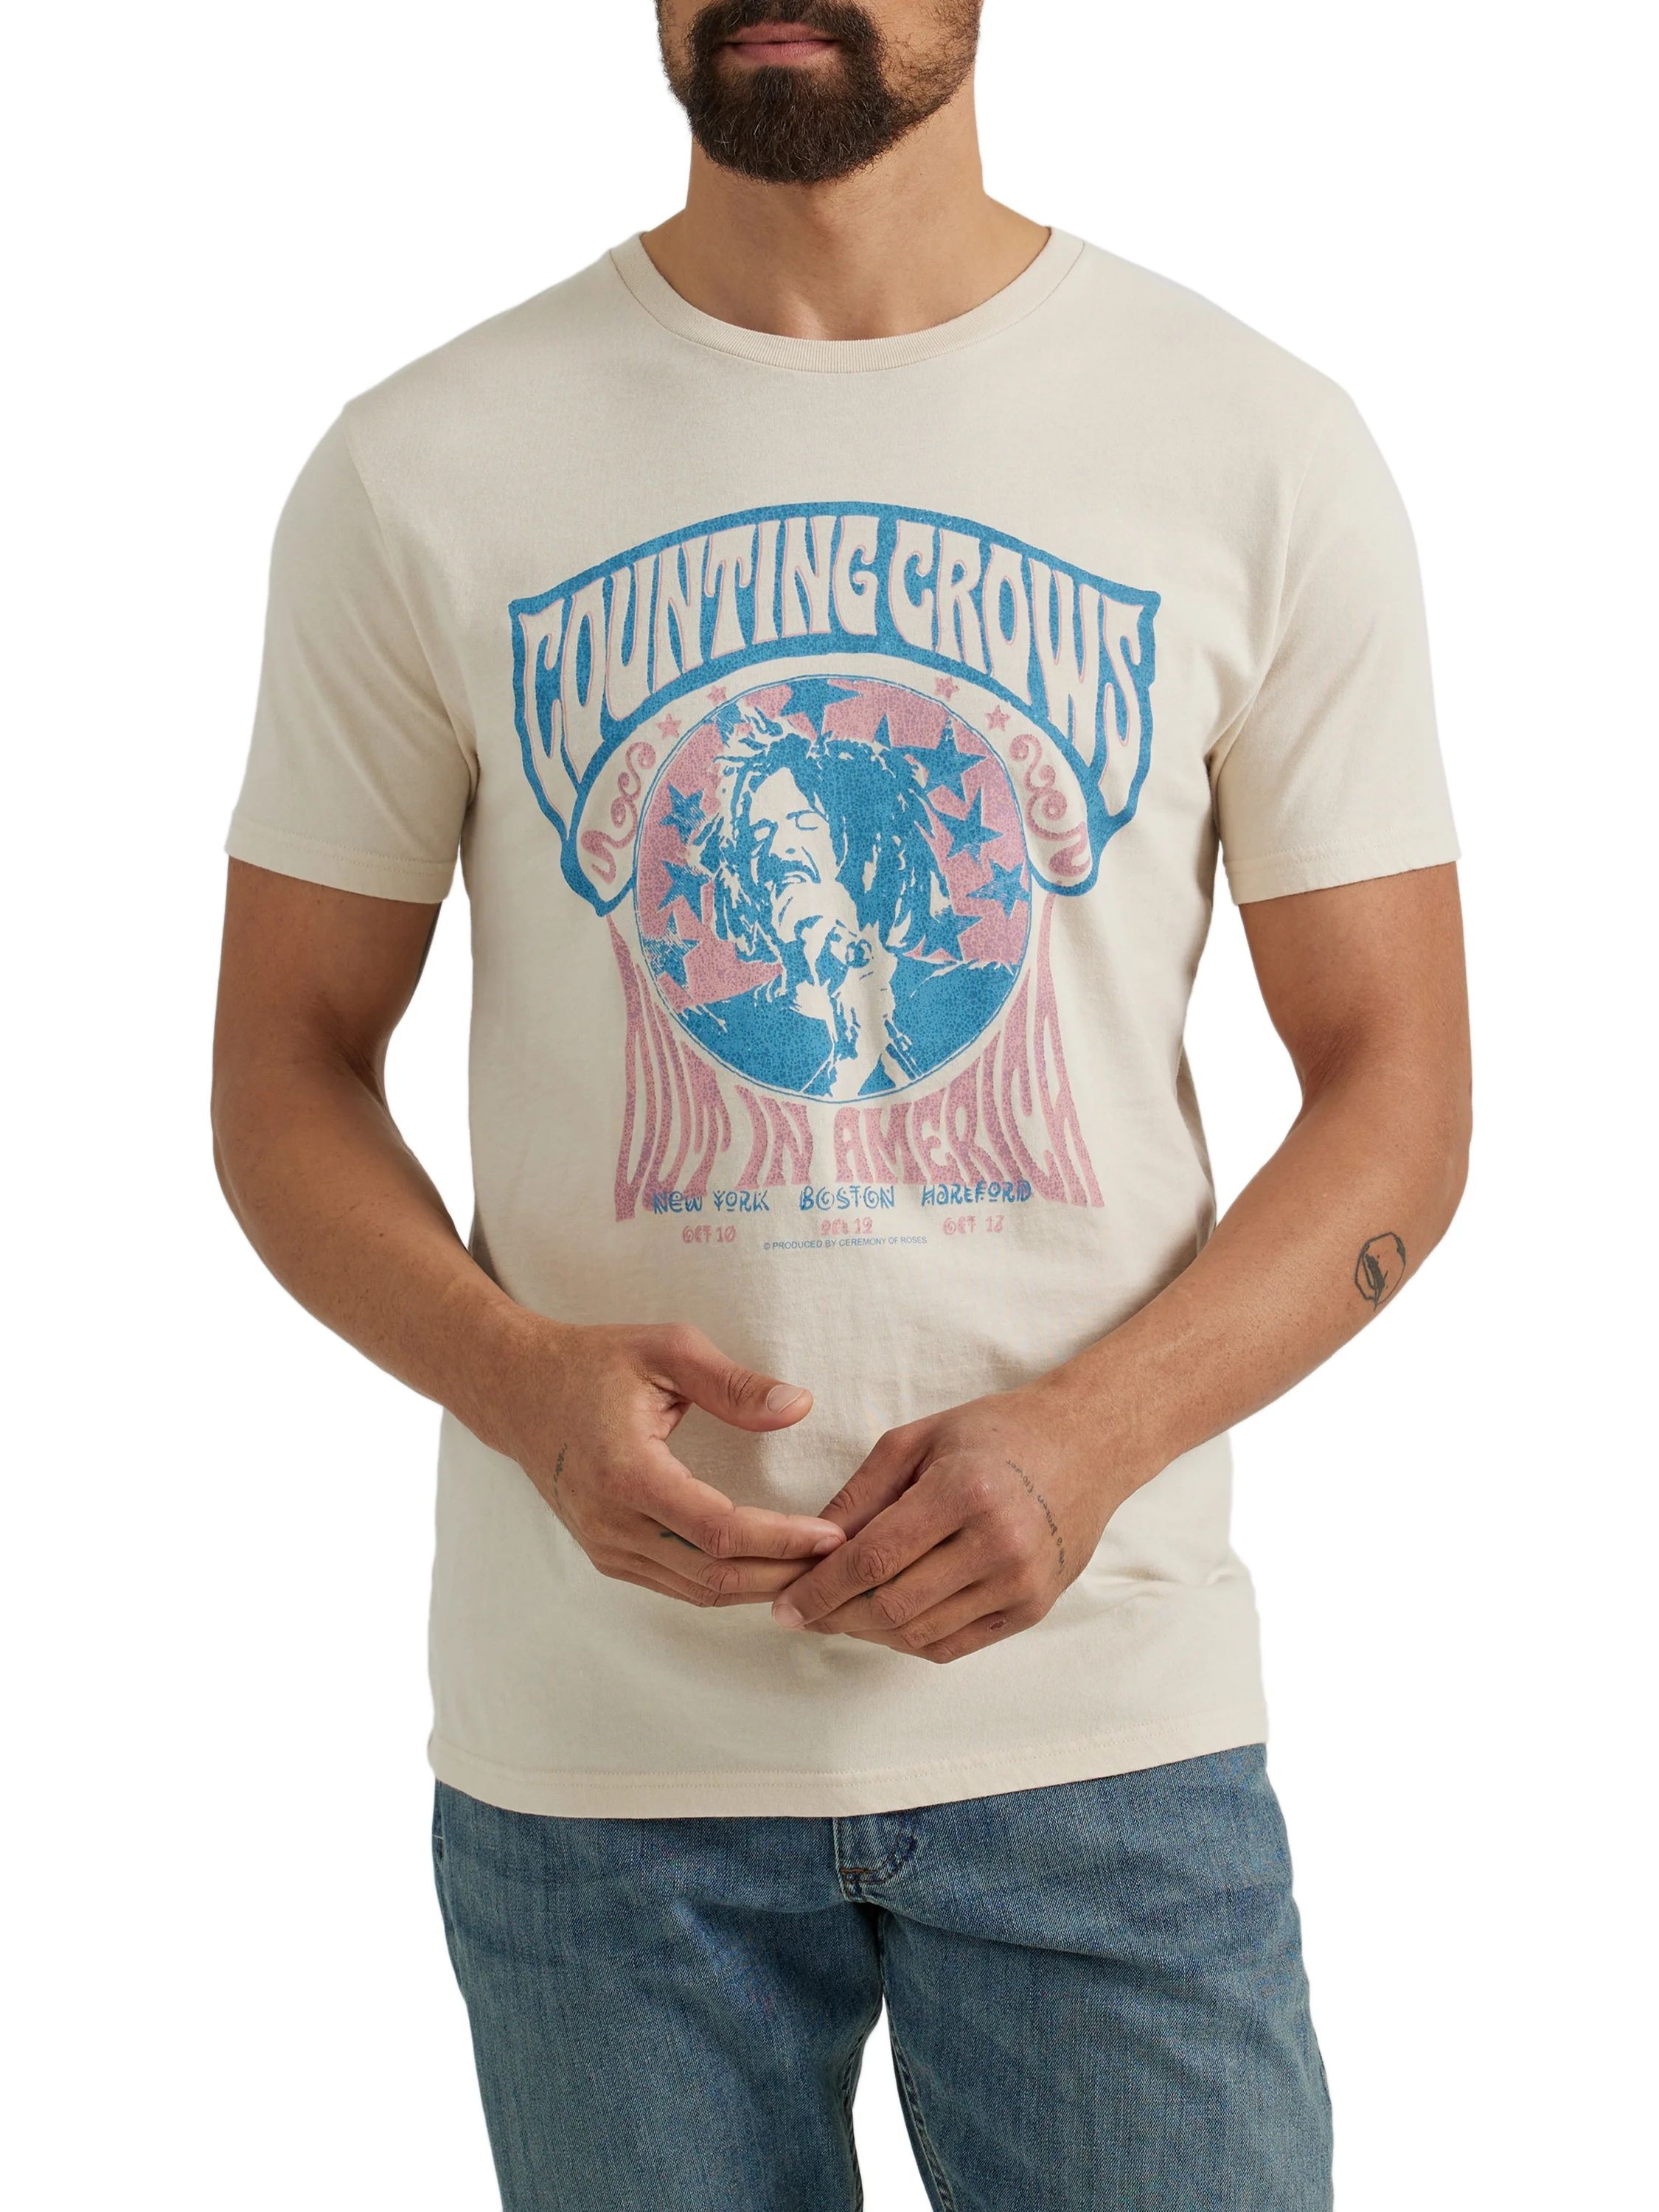 Wrangler® Men's Short Sleeve Counting Crows Graphic Band Tee, Sizes S-3XL | Walmart (US)